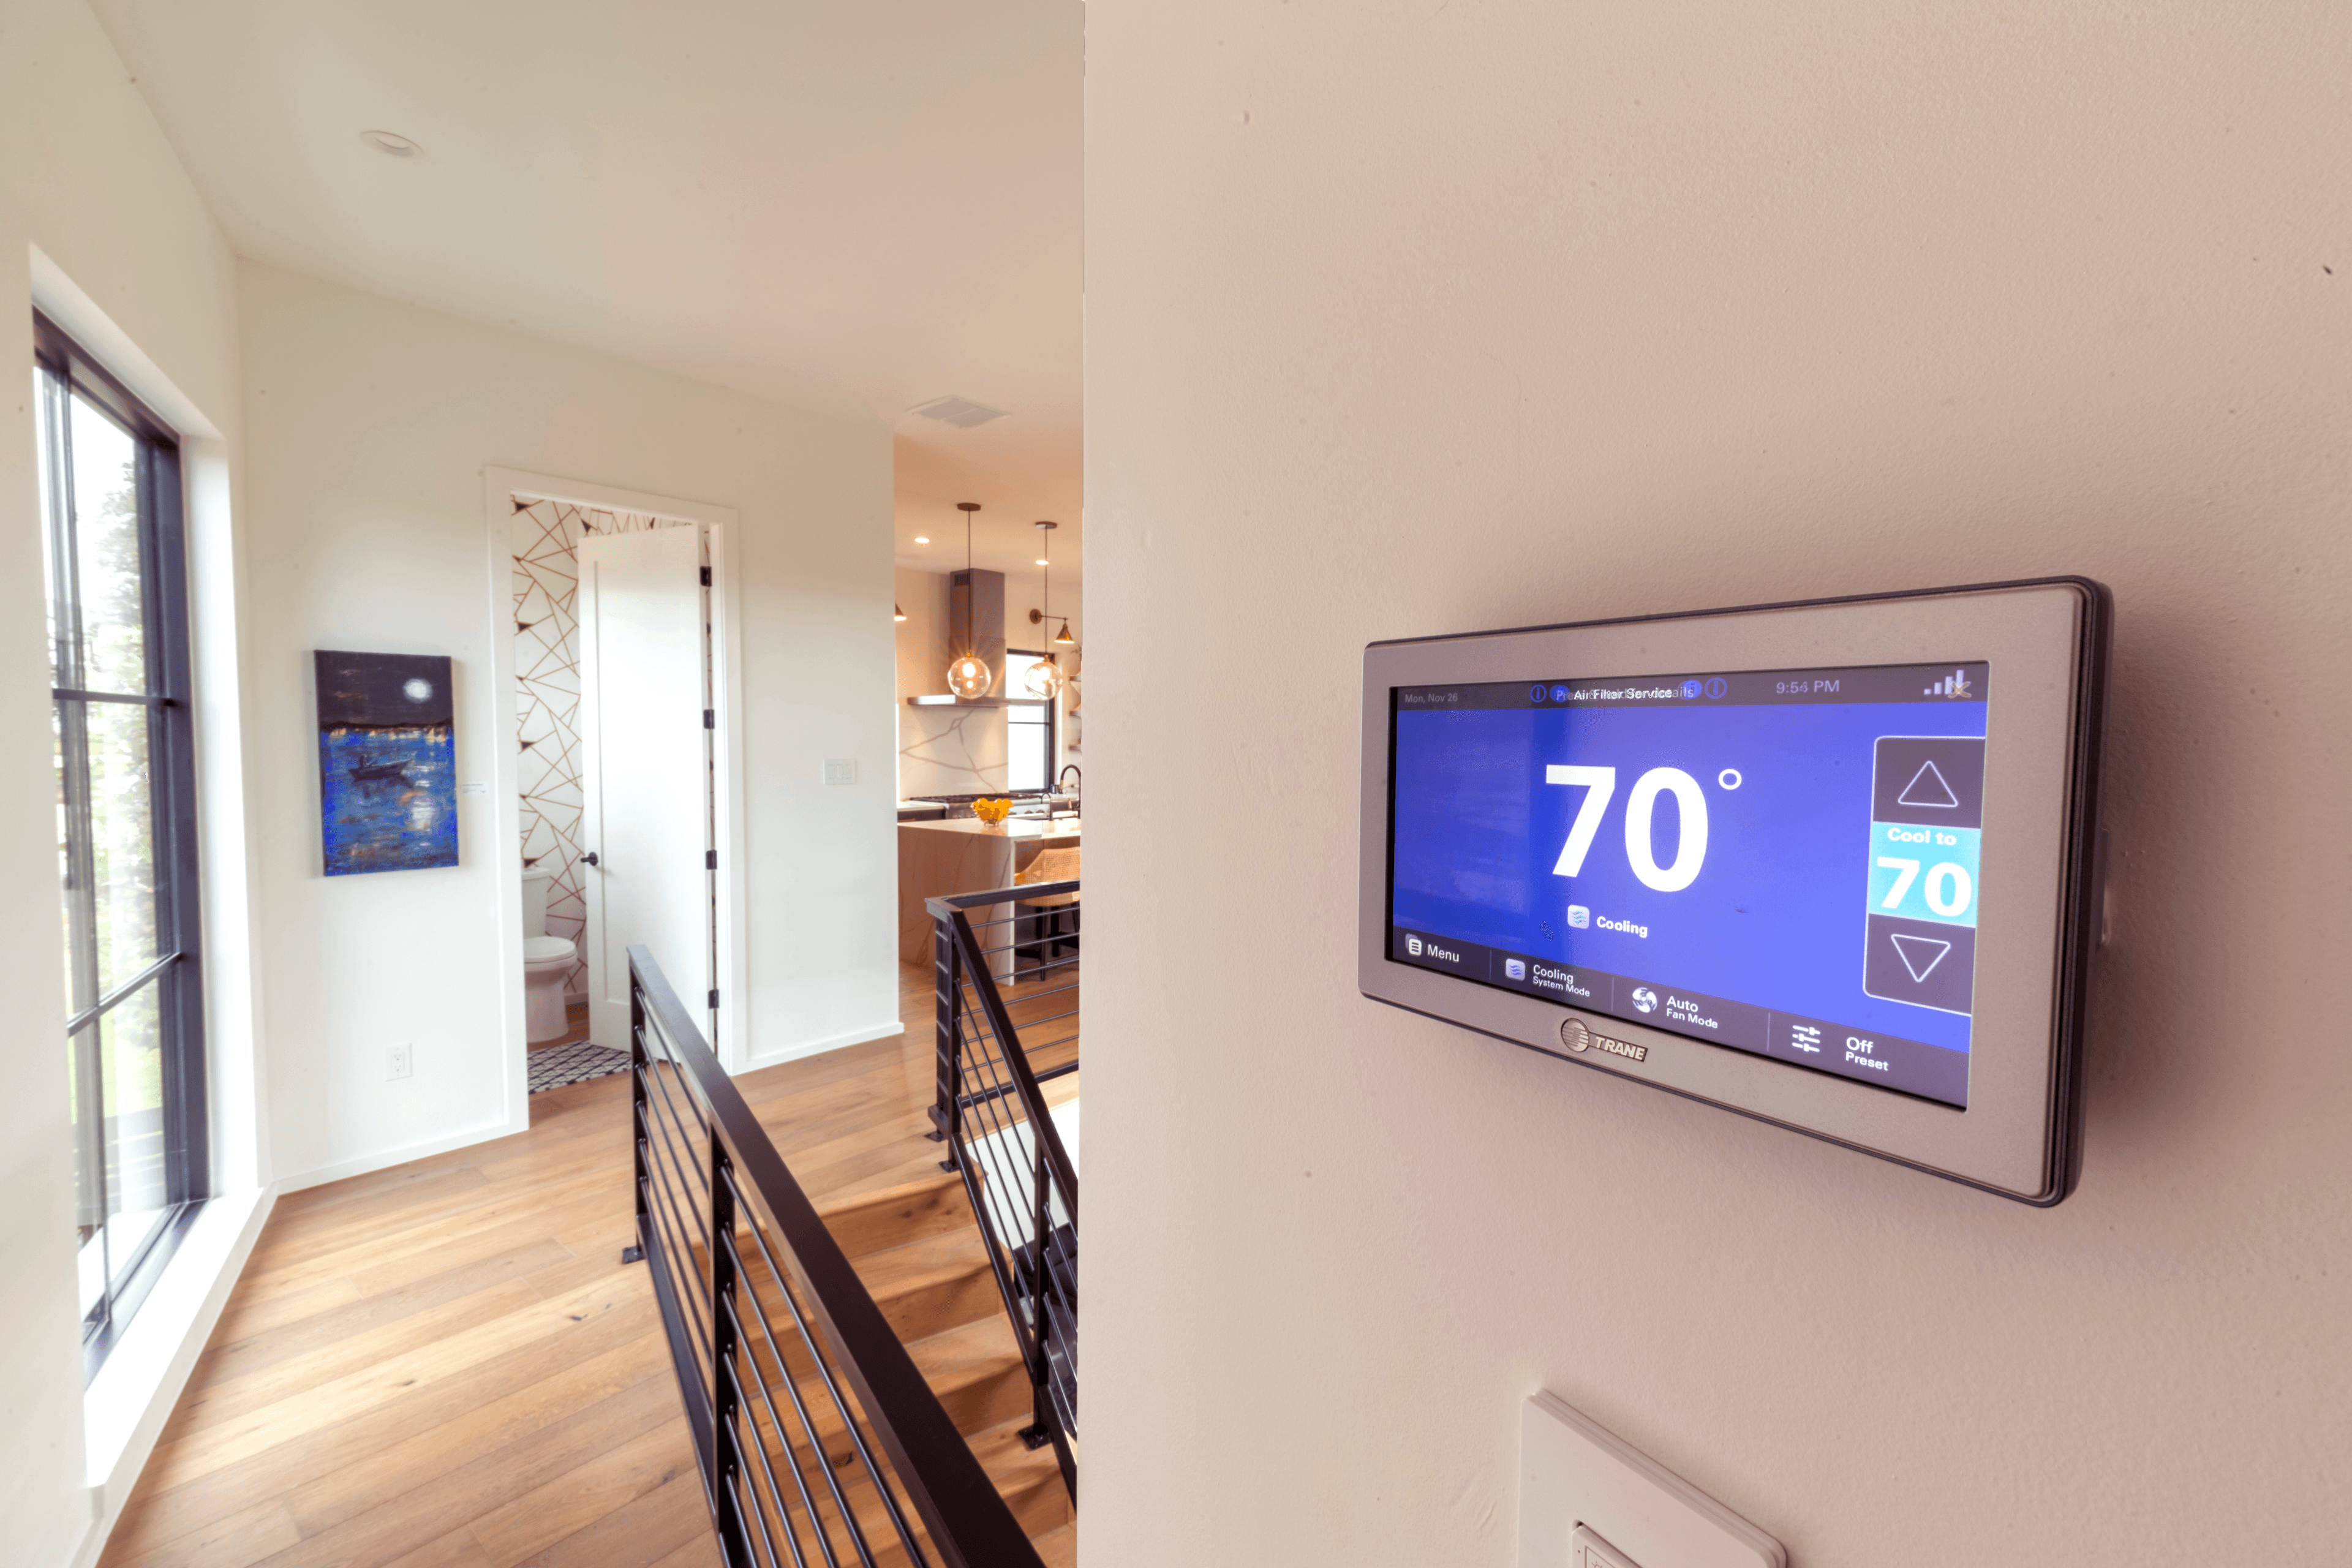 Trane smart thermostat reads 70 degrees inside a home with a bathroom and kitchen in the background.